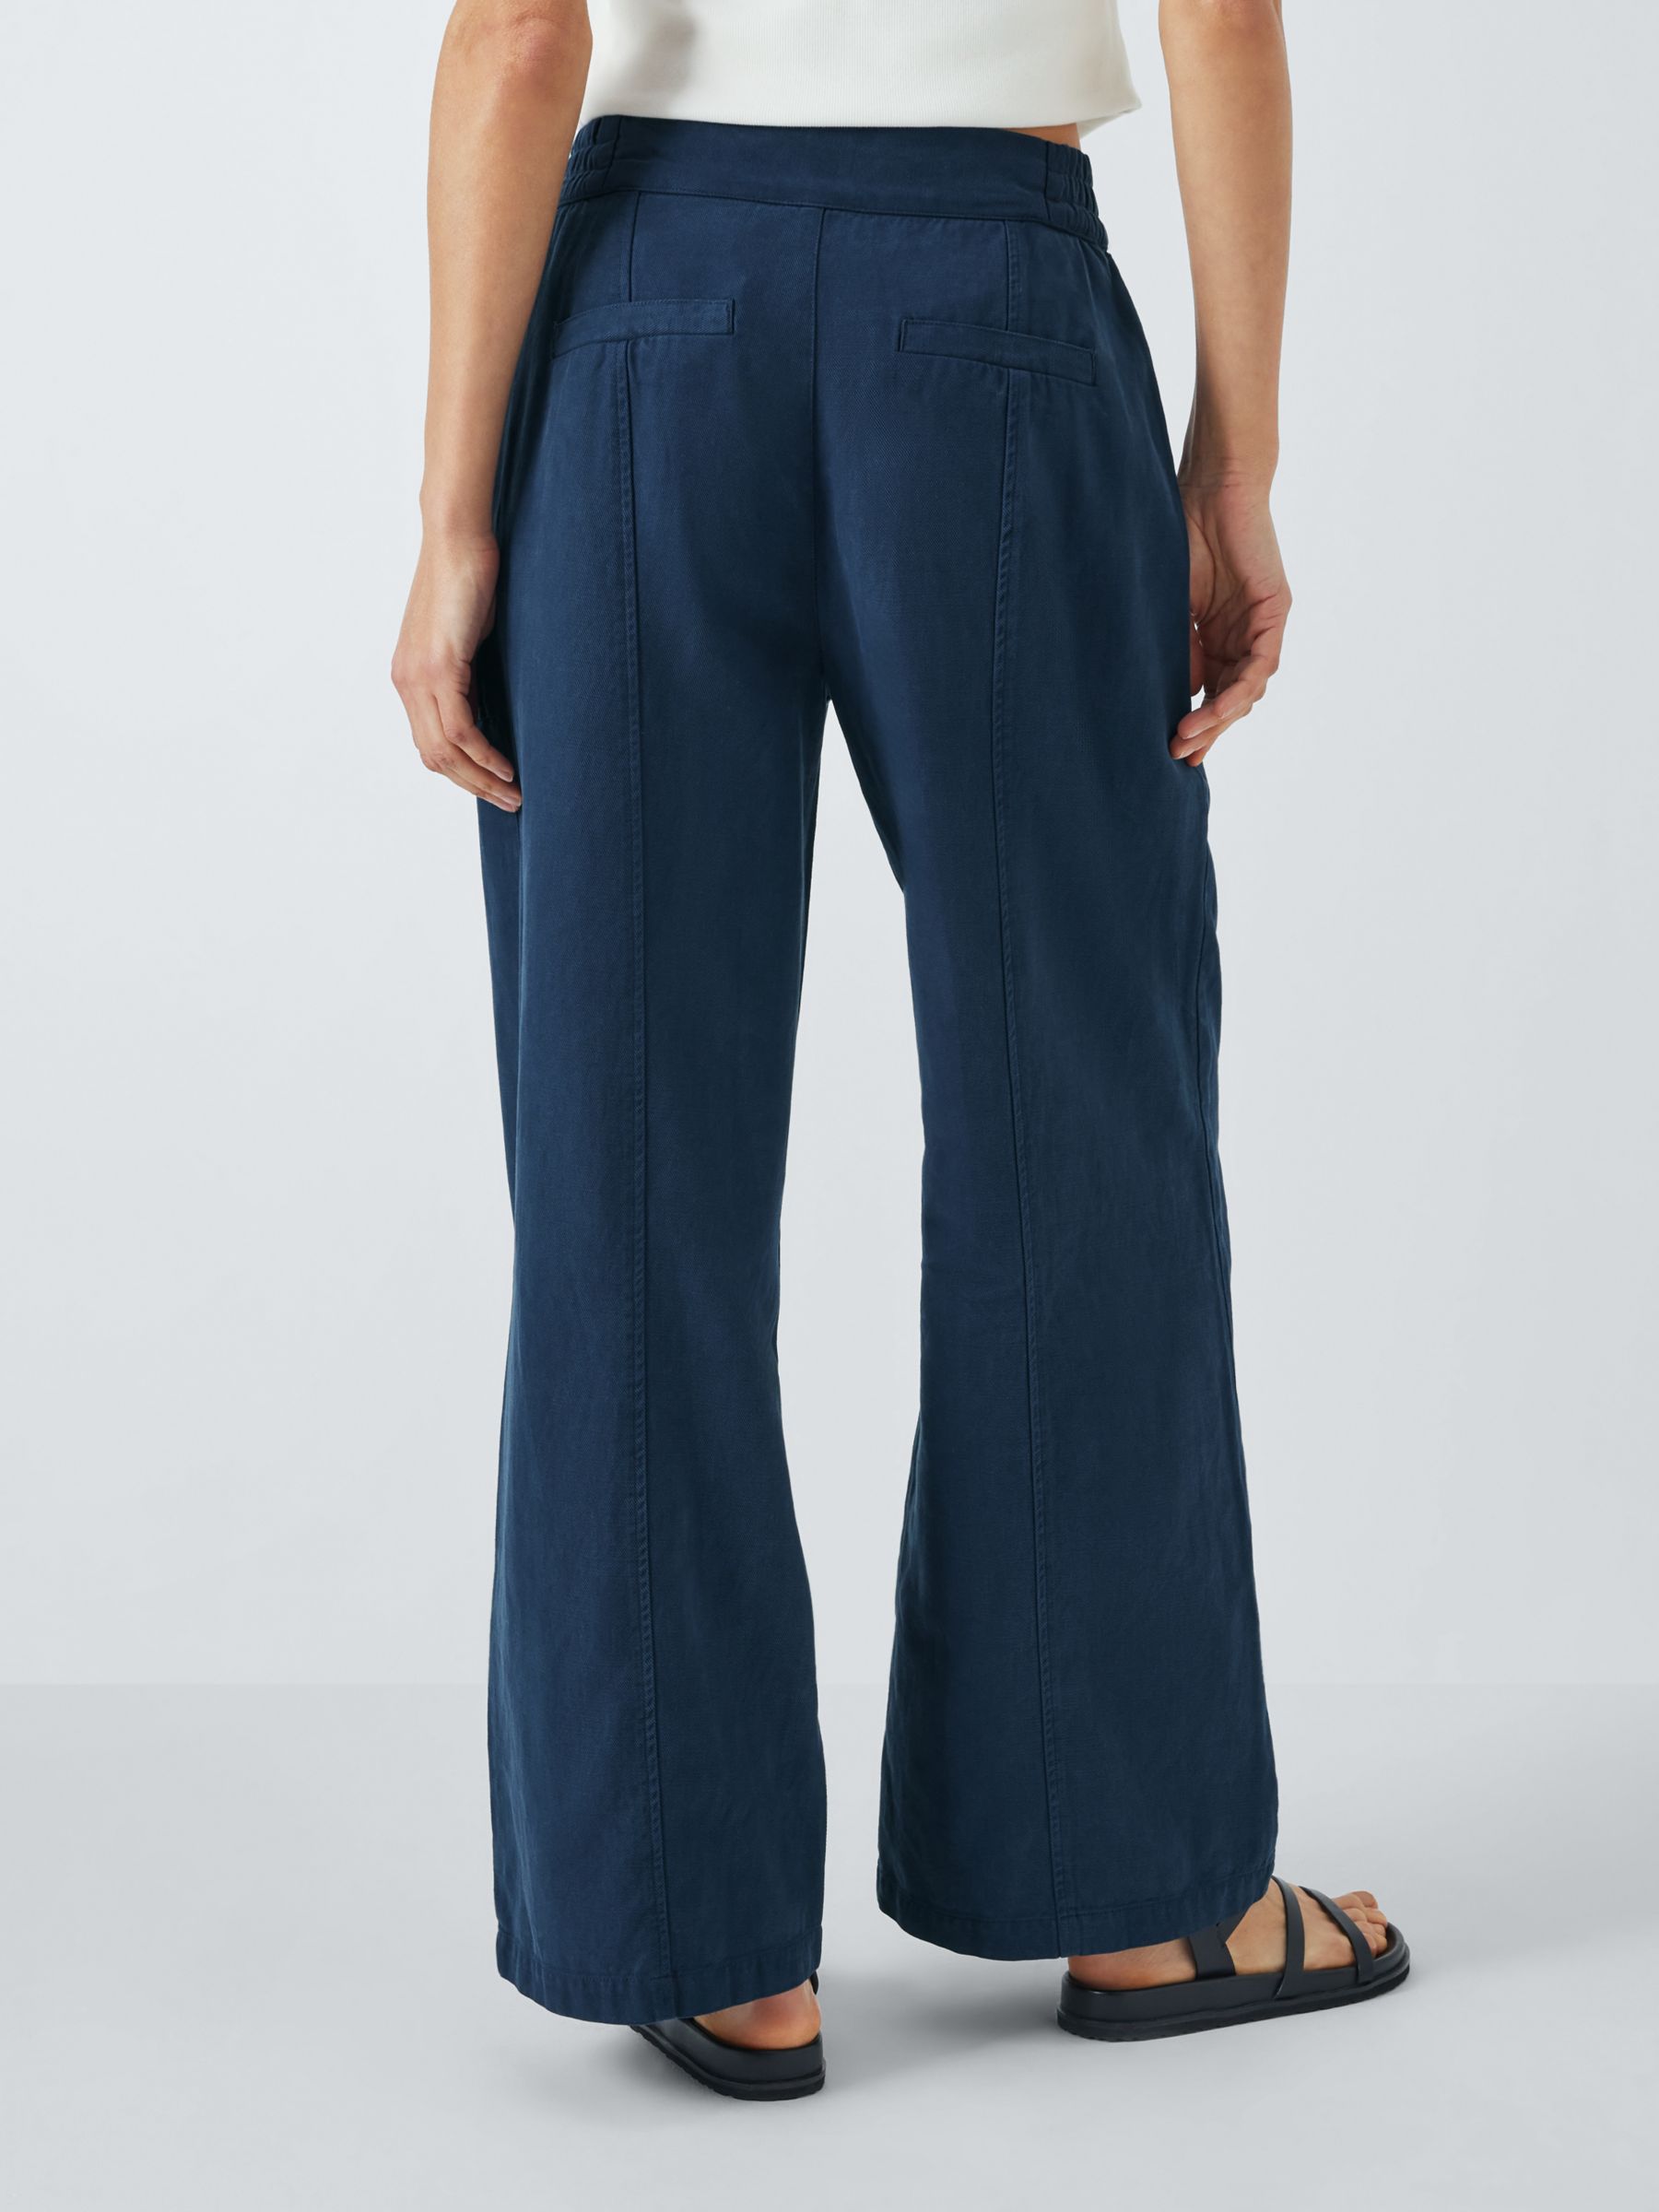 Rails Greer Vintage Twill Trousers, Navy, M